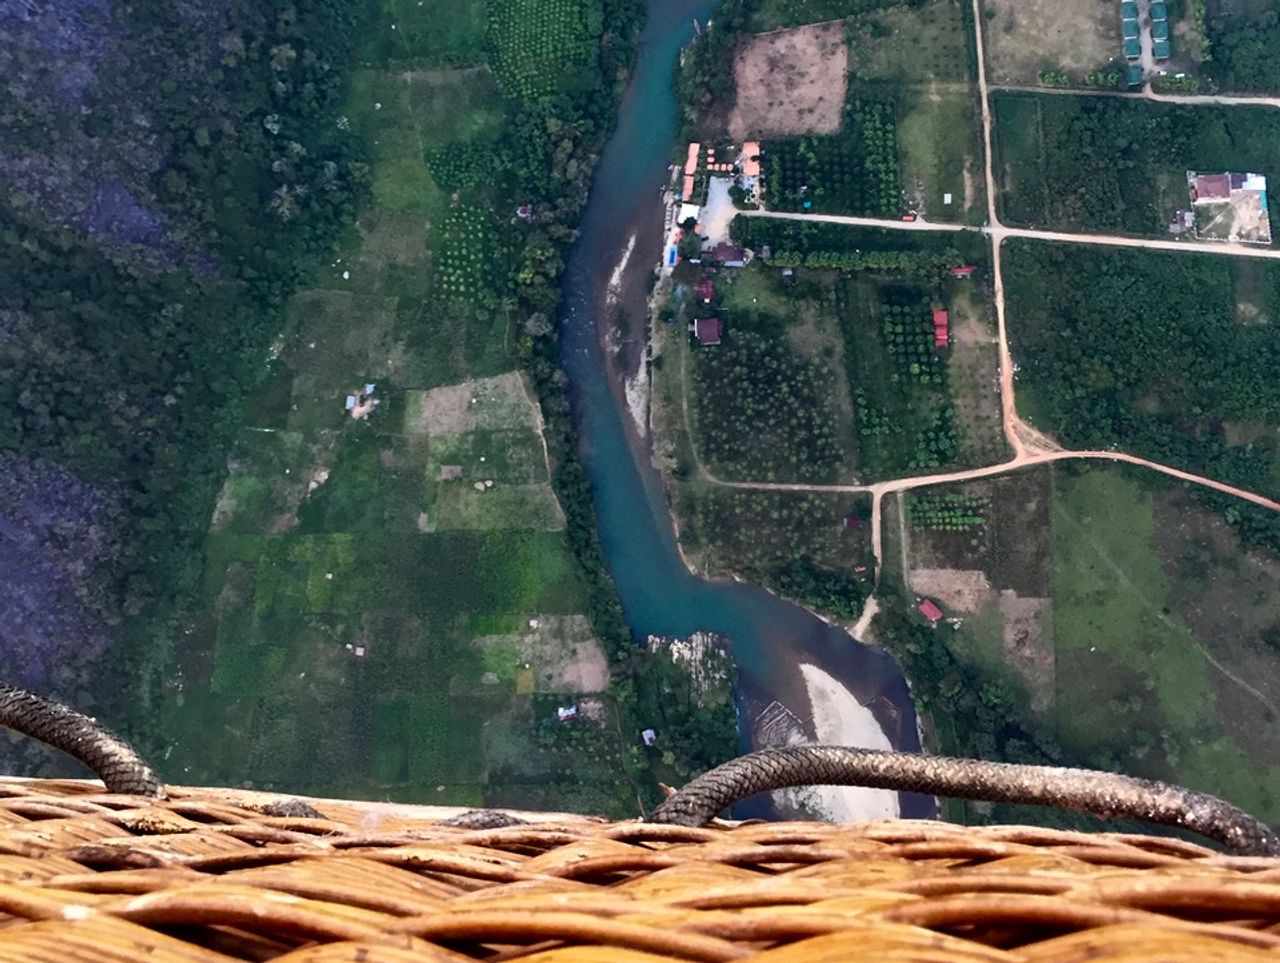 Looking over the edge of a balloon basket.